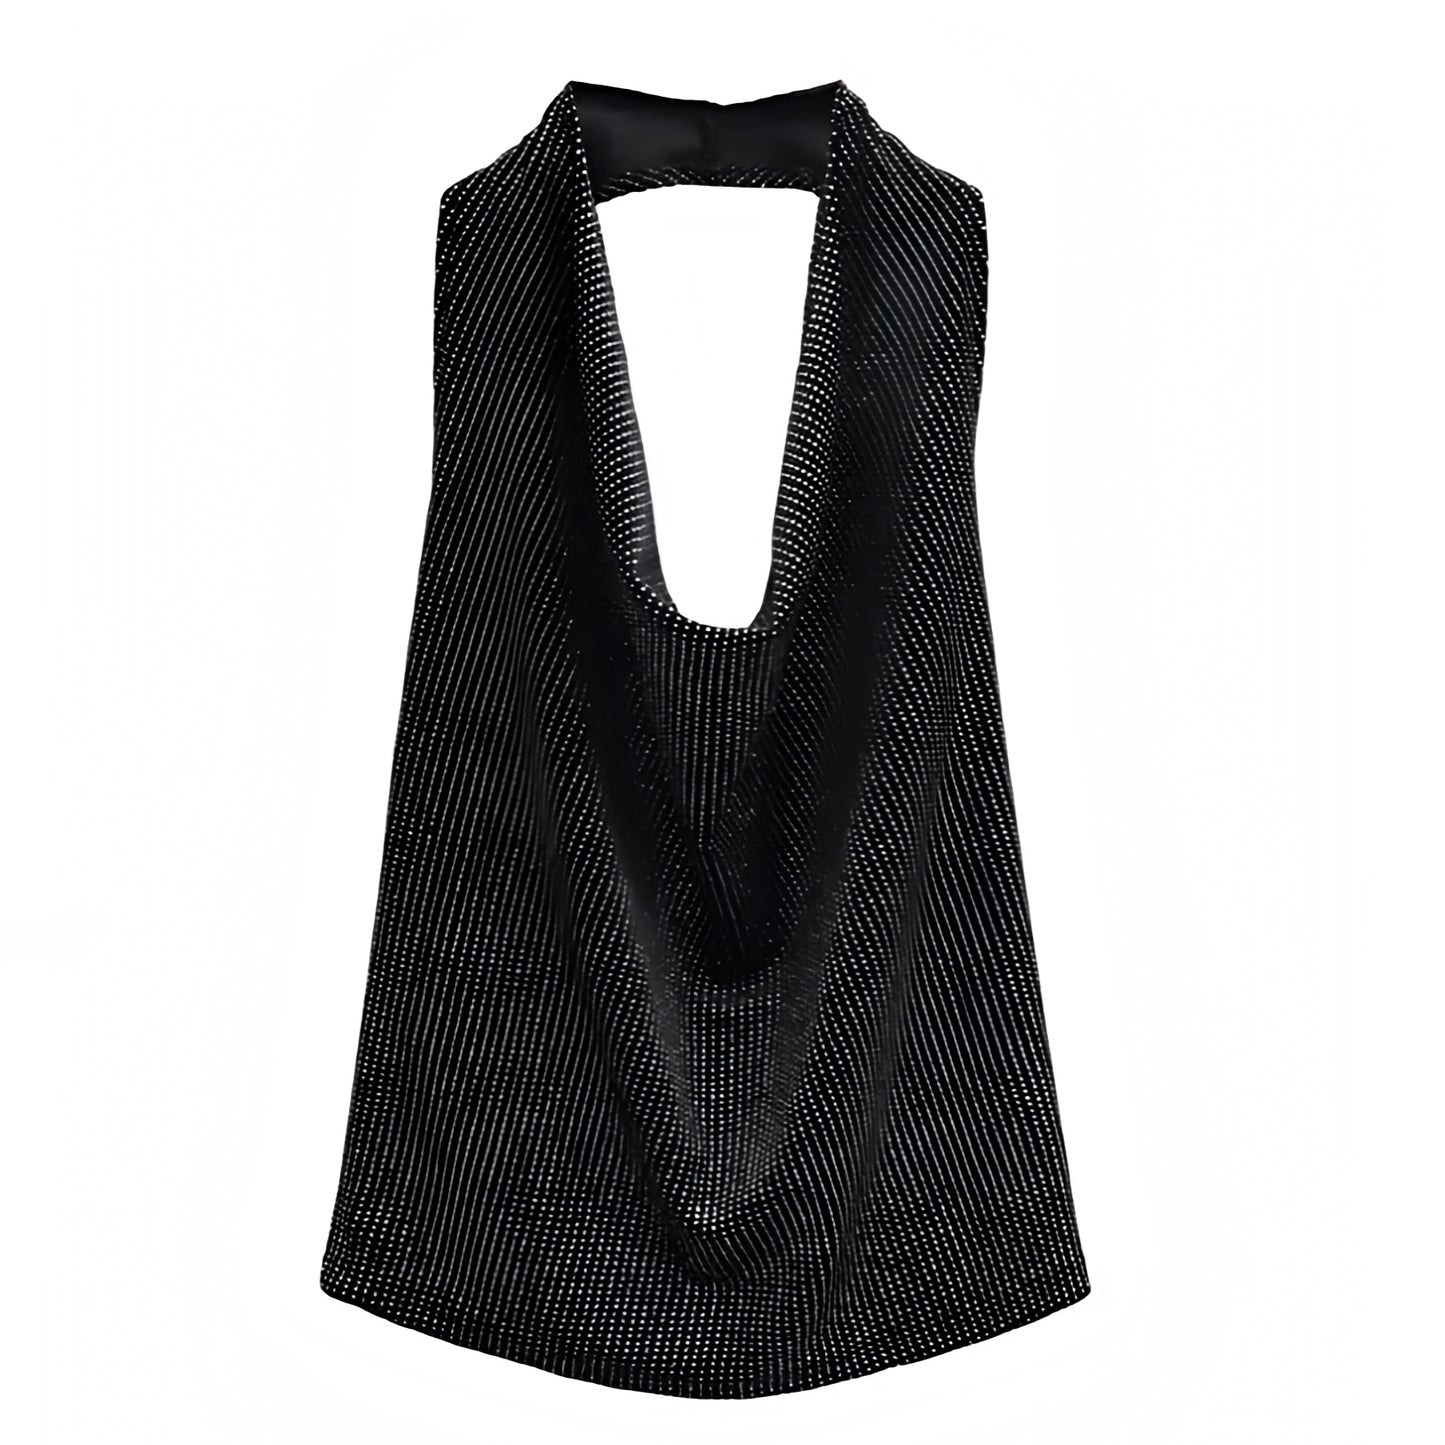 black-glitter-spotted-shimmer-silver-draped-ruched-scoop-neck-sleeveless-slim-fit-backless-open-back-cut-out-crop-camisole-tank-top-blouse-women-ladies-chic-trendy-spring-2024-summer-elegant-casual-semi-formal-classy-feminine-party-date-night-out-sexy-club-wear-y2k-90s-minimalist-office-siren-style-zara-revolve-aritzia-white-fox-princess-polly-babyboo-iamgia-edikted-fenity